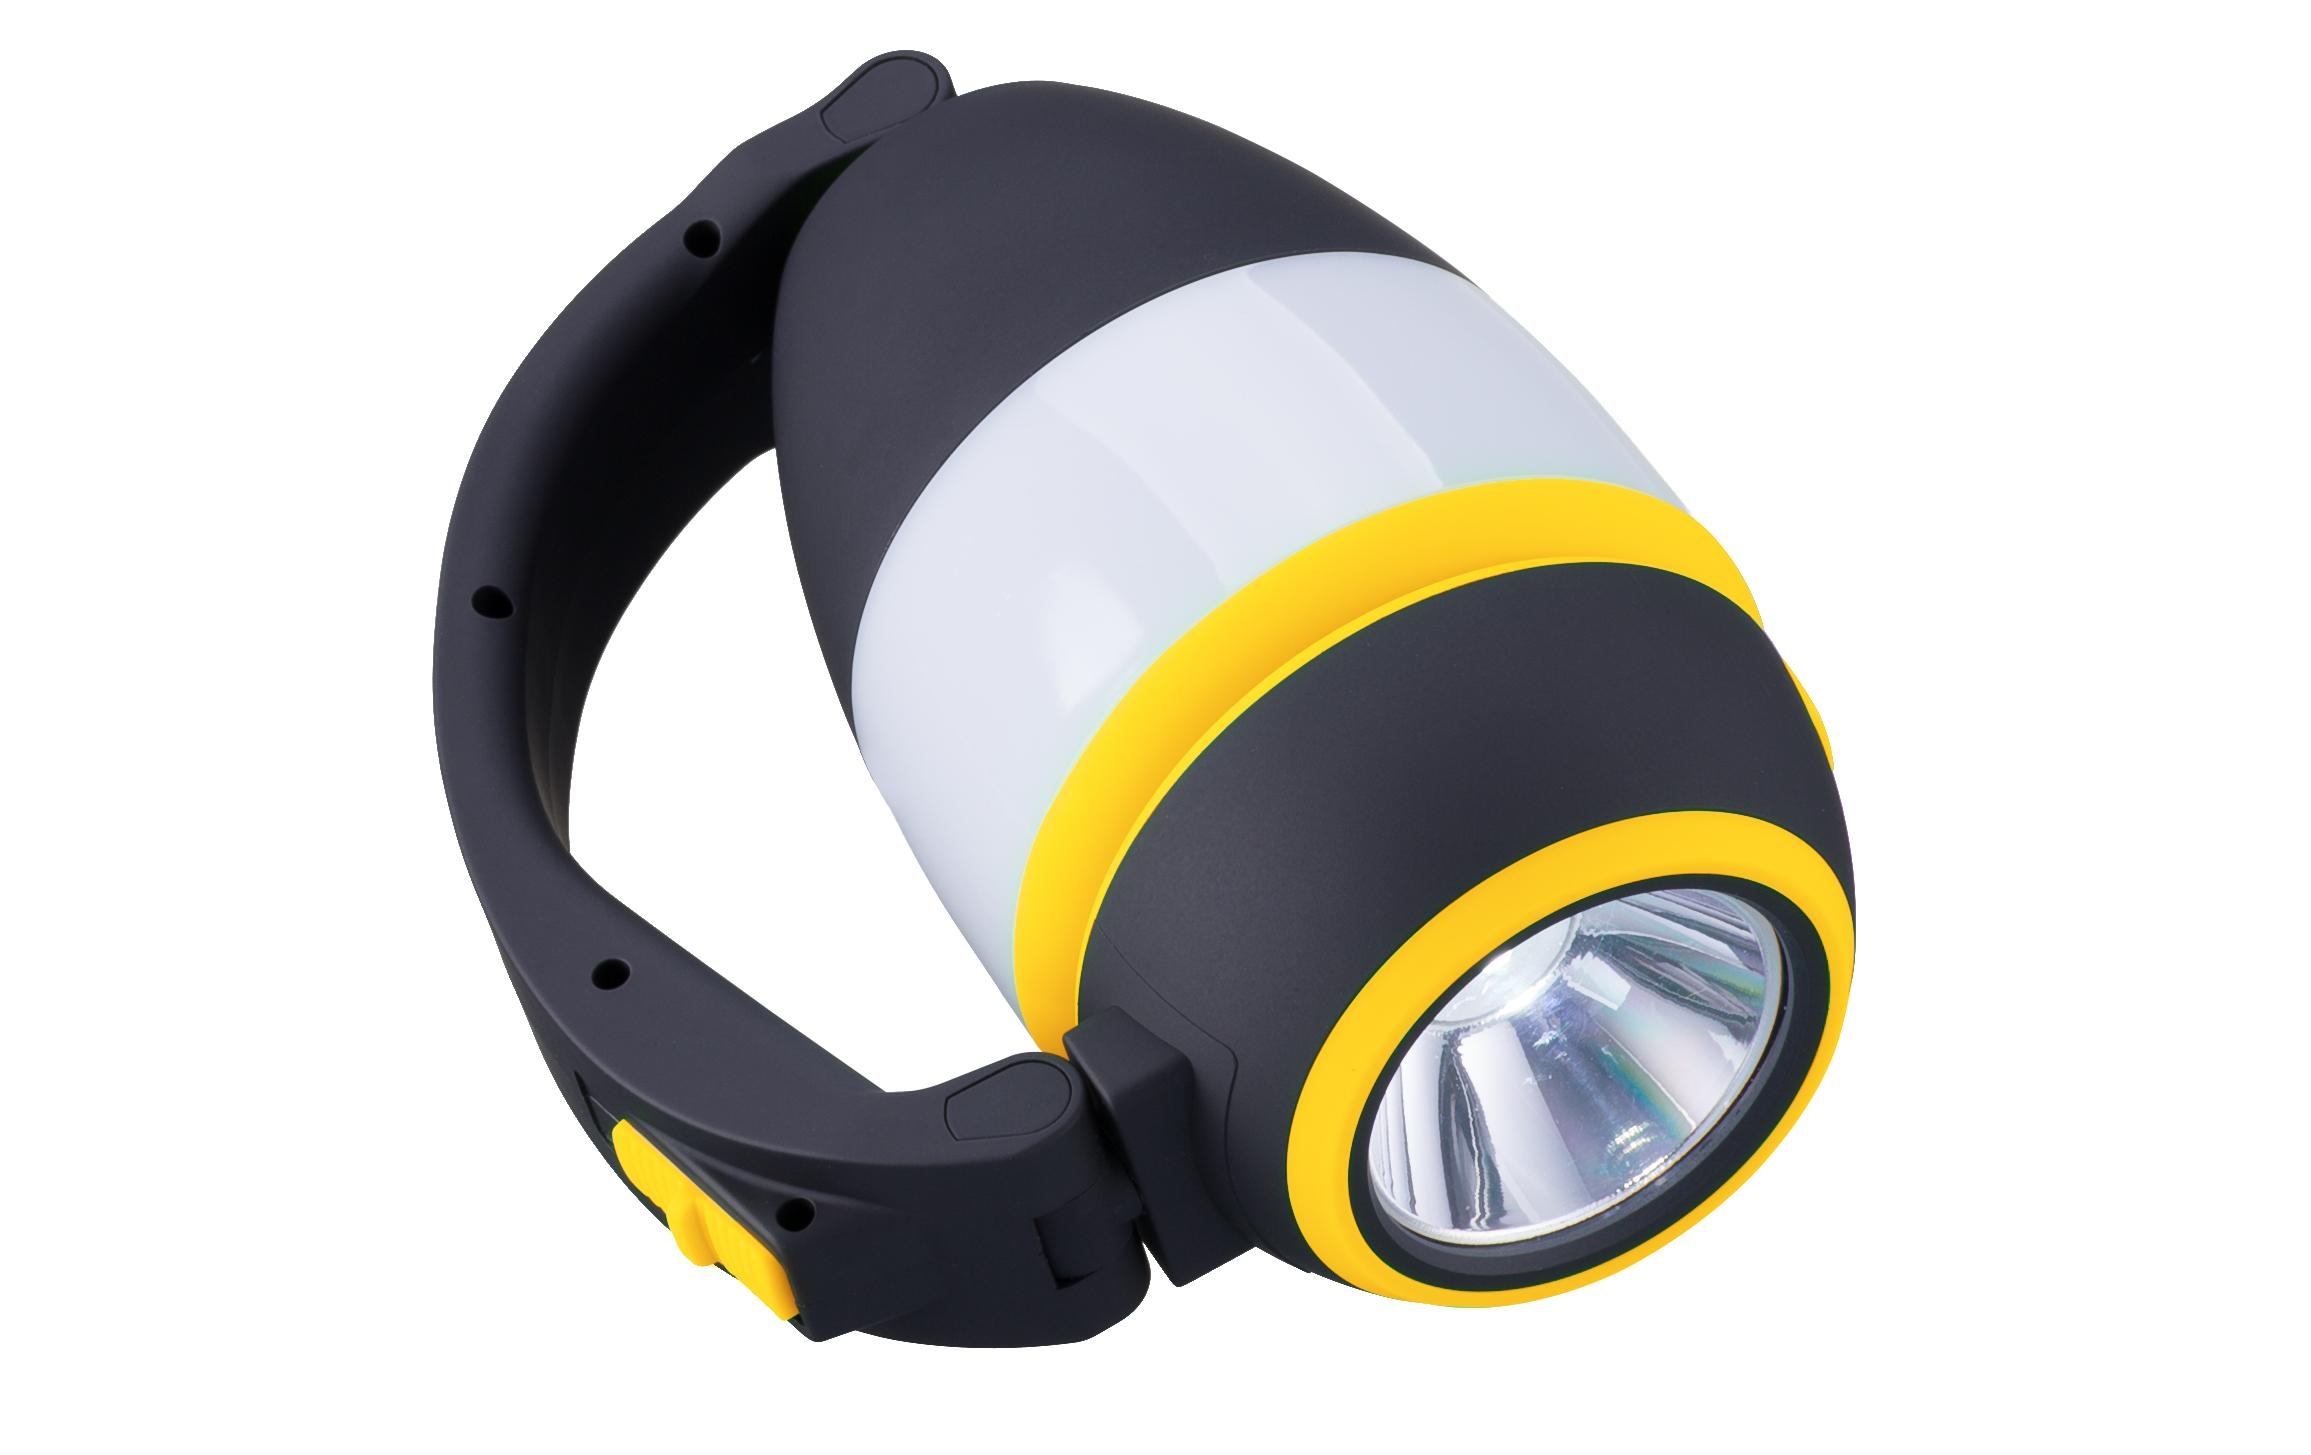 NATIONAL GEOGRAPHIC LED Laterne »Outdoor 3in1 Outdoor-Laterne«, 1 flammig